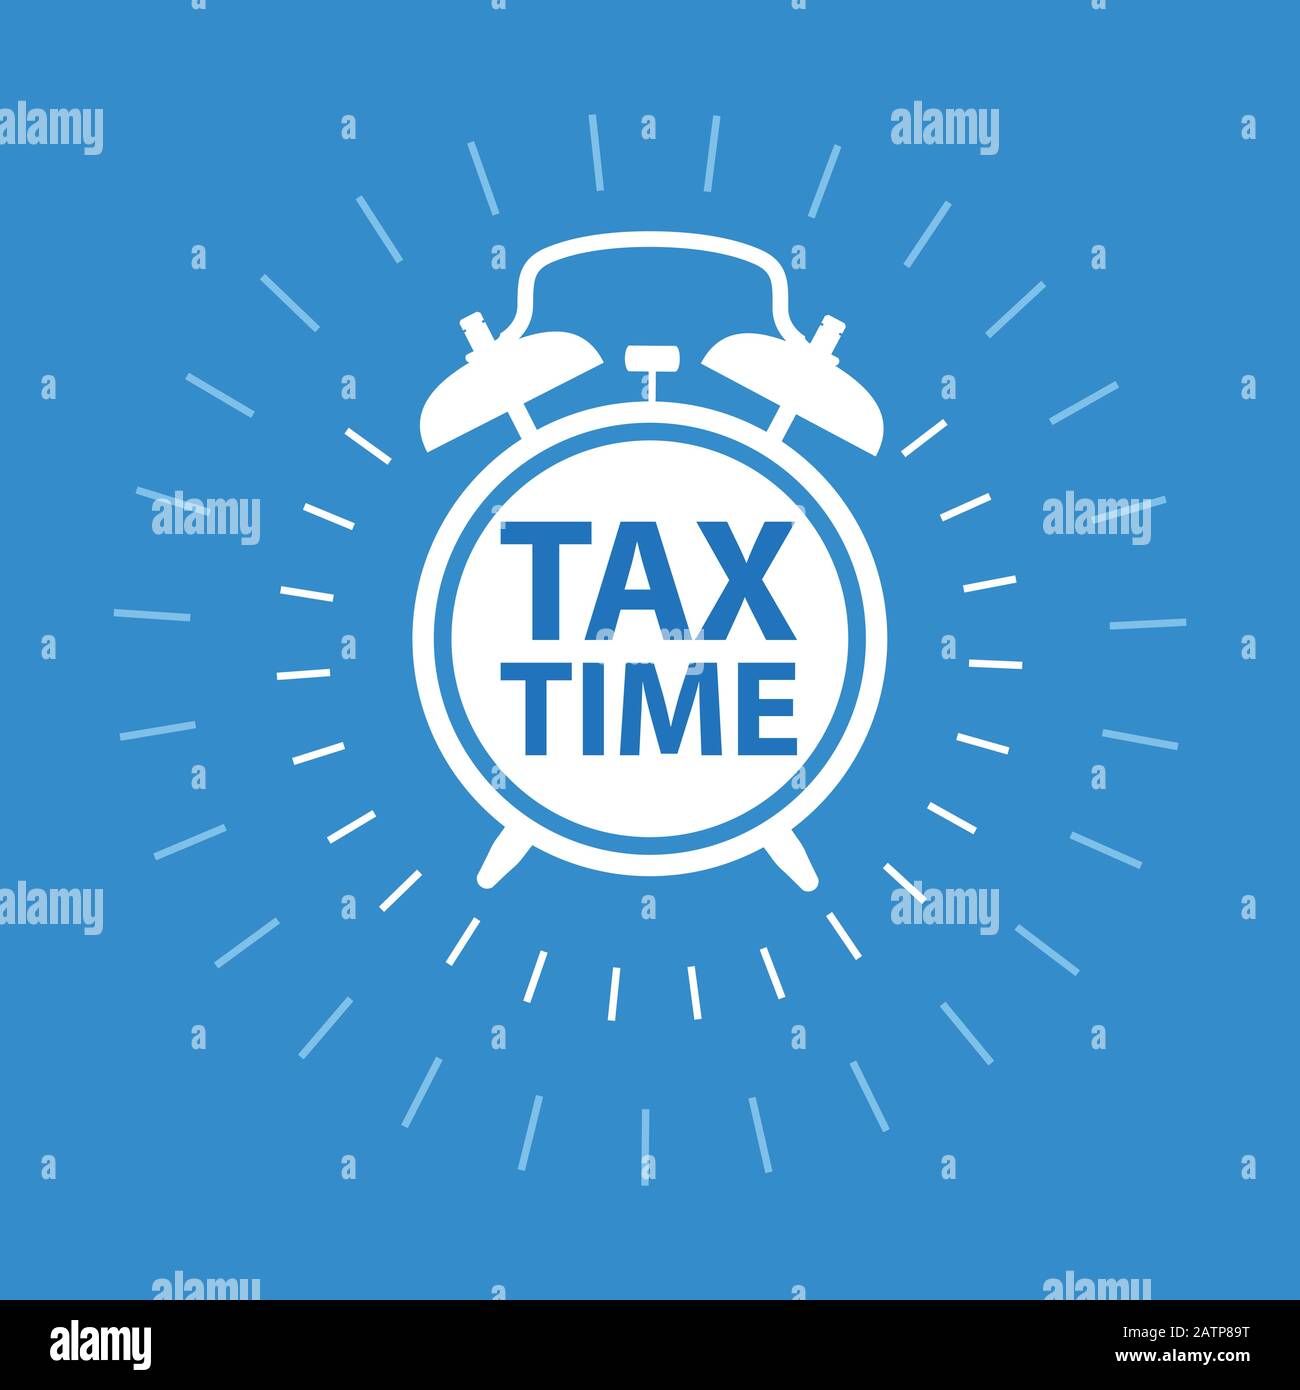 Tax payment time icon - reminder about taxation, tax time clock Stock Vector